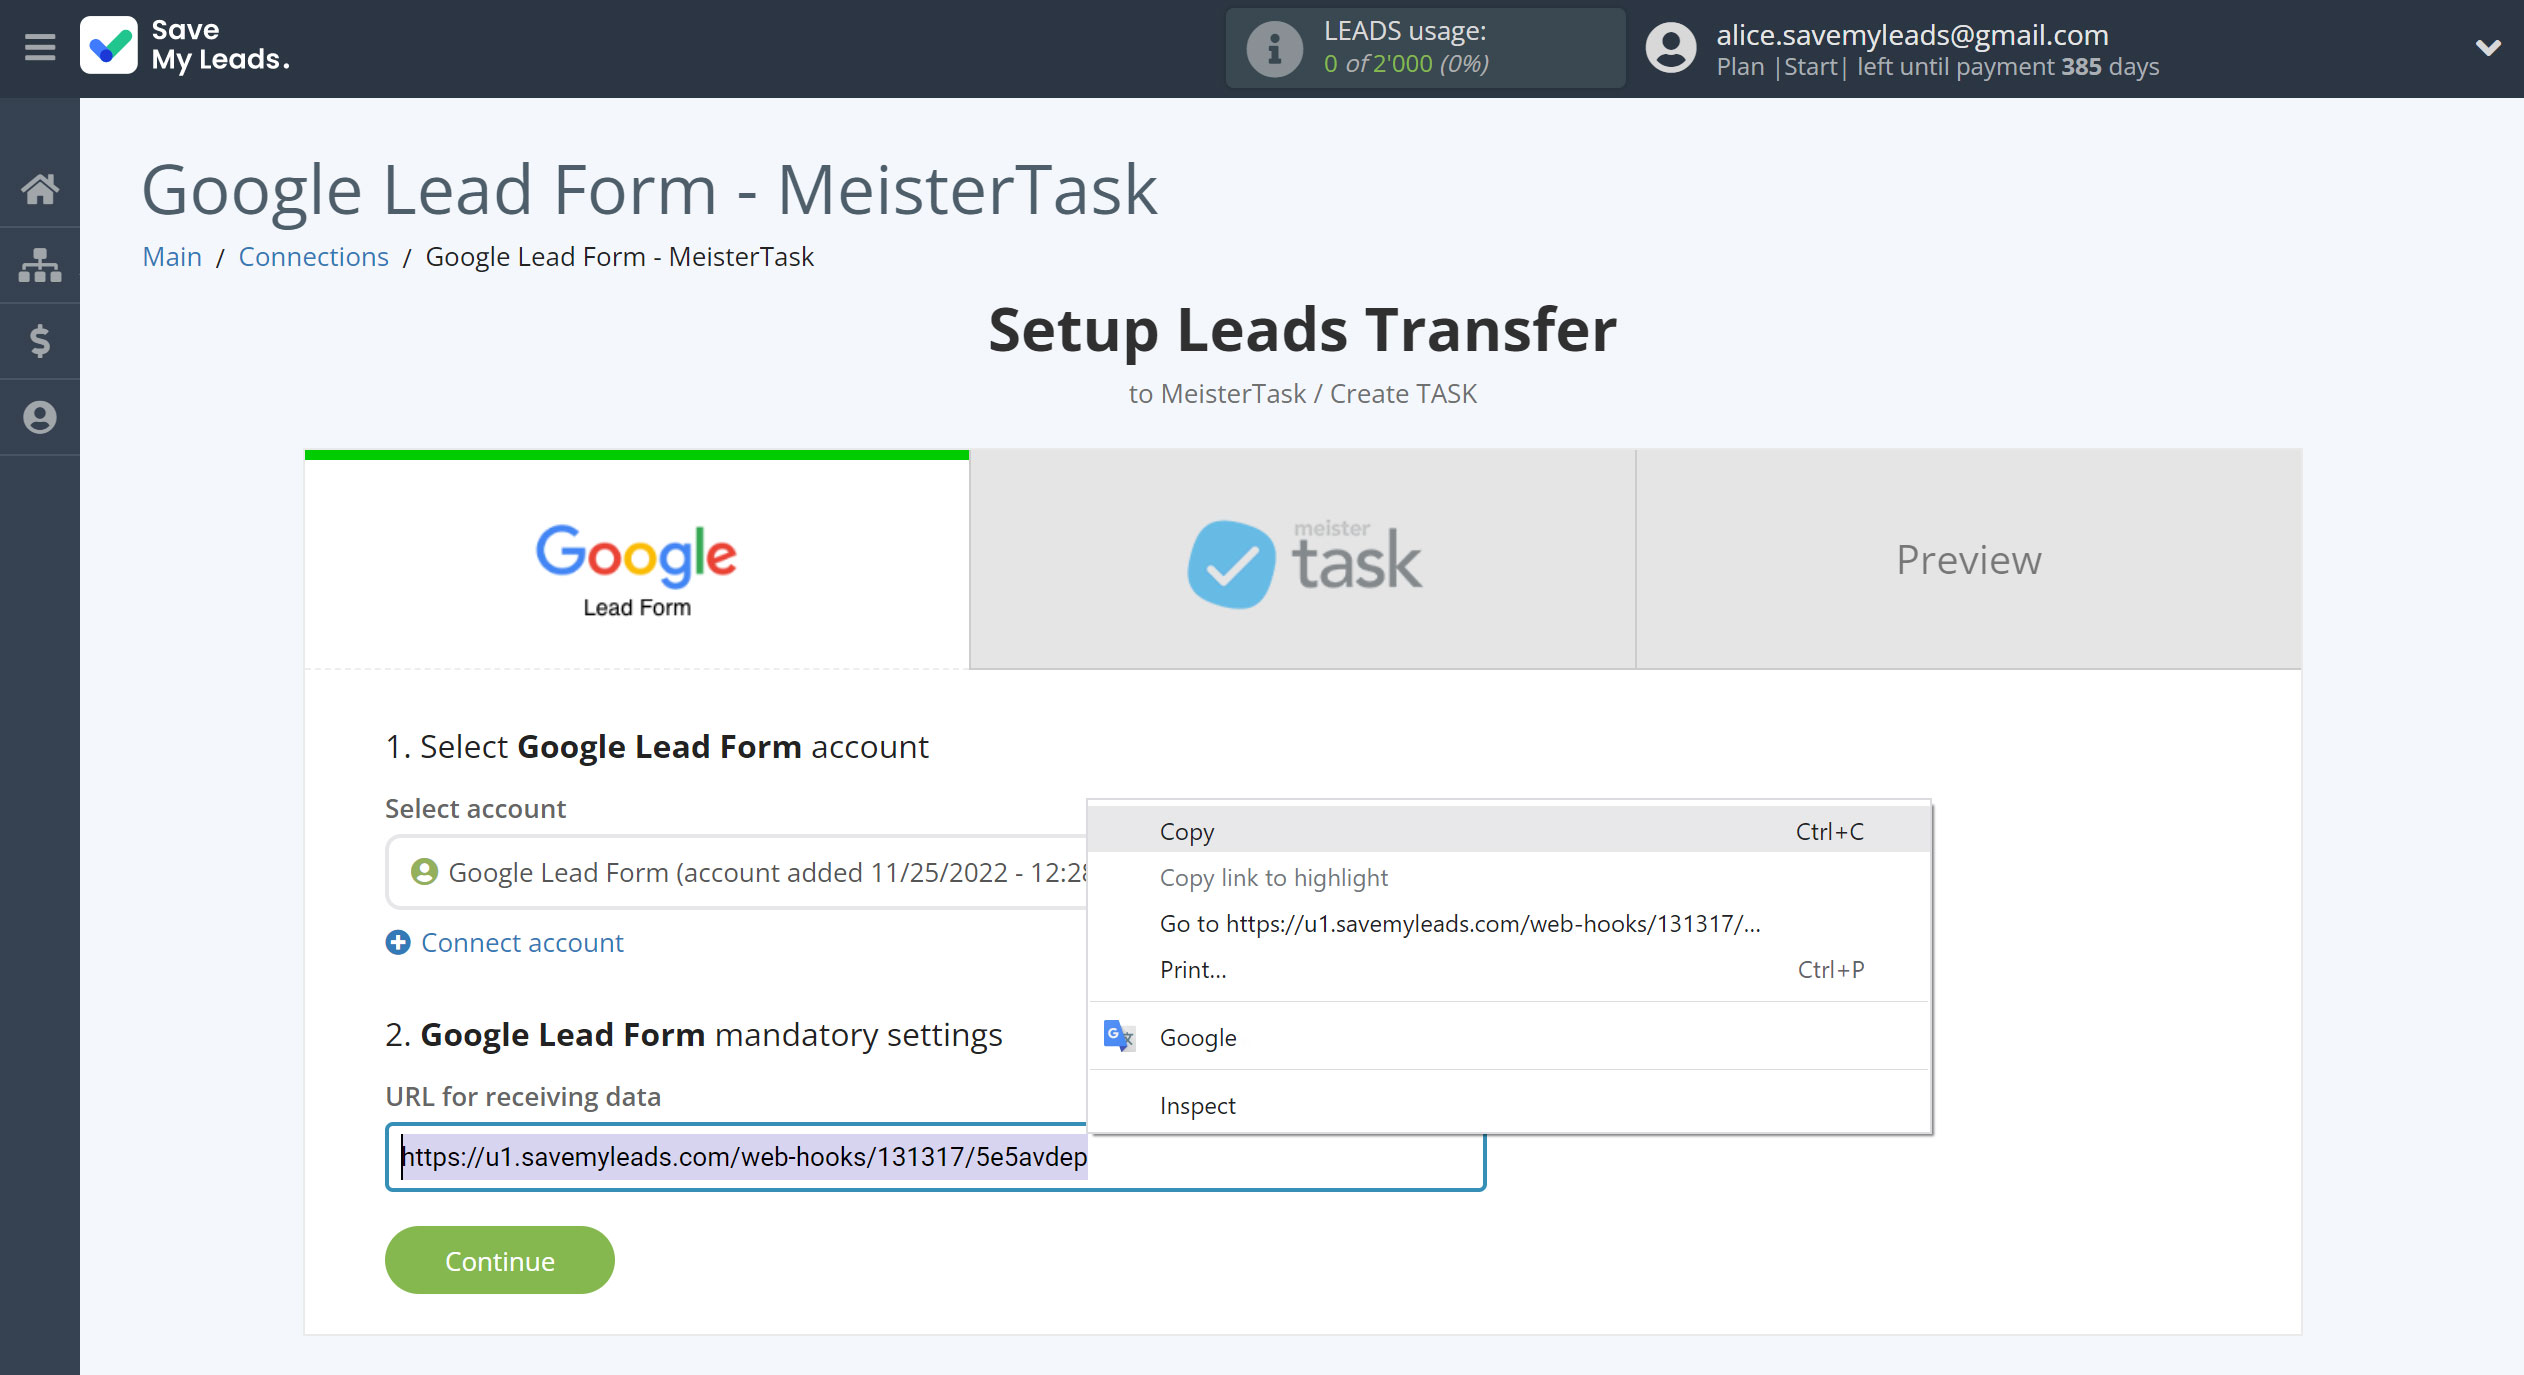 How to Connect Google Lead Form with MeisterTask | Data Source account connection